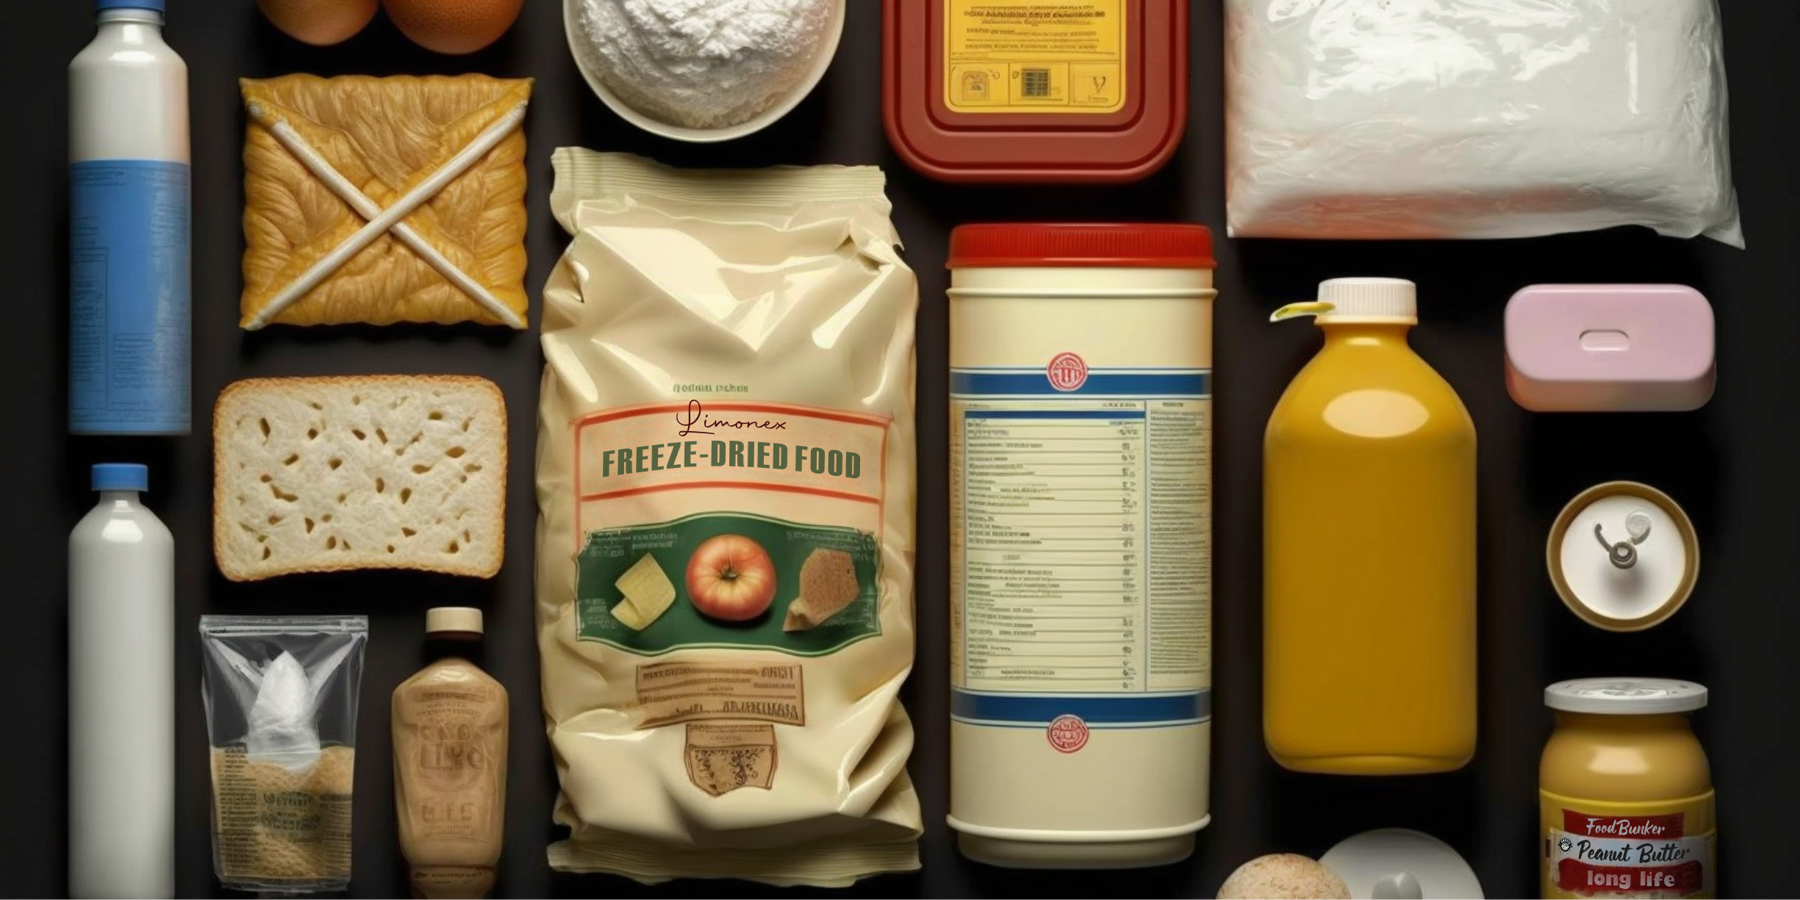 10 Foods That Should Be in Every Emergency Kit